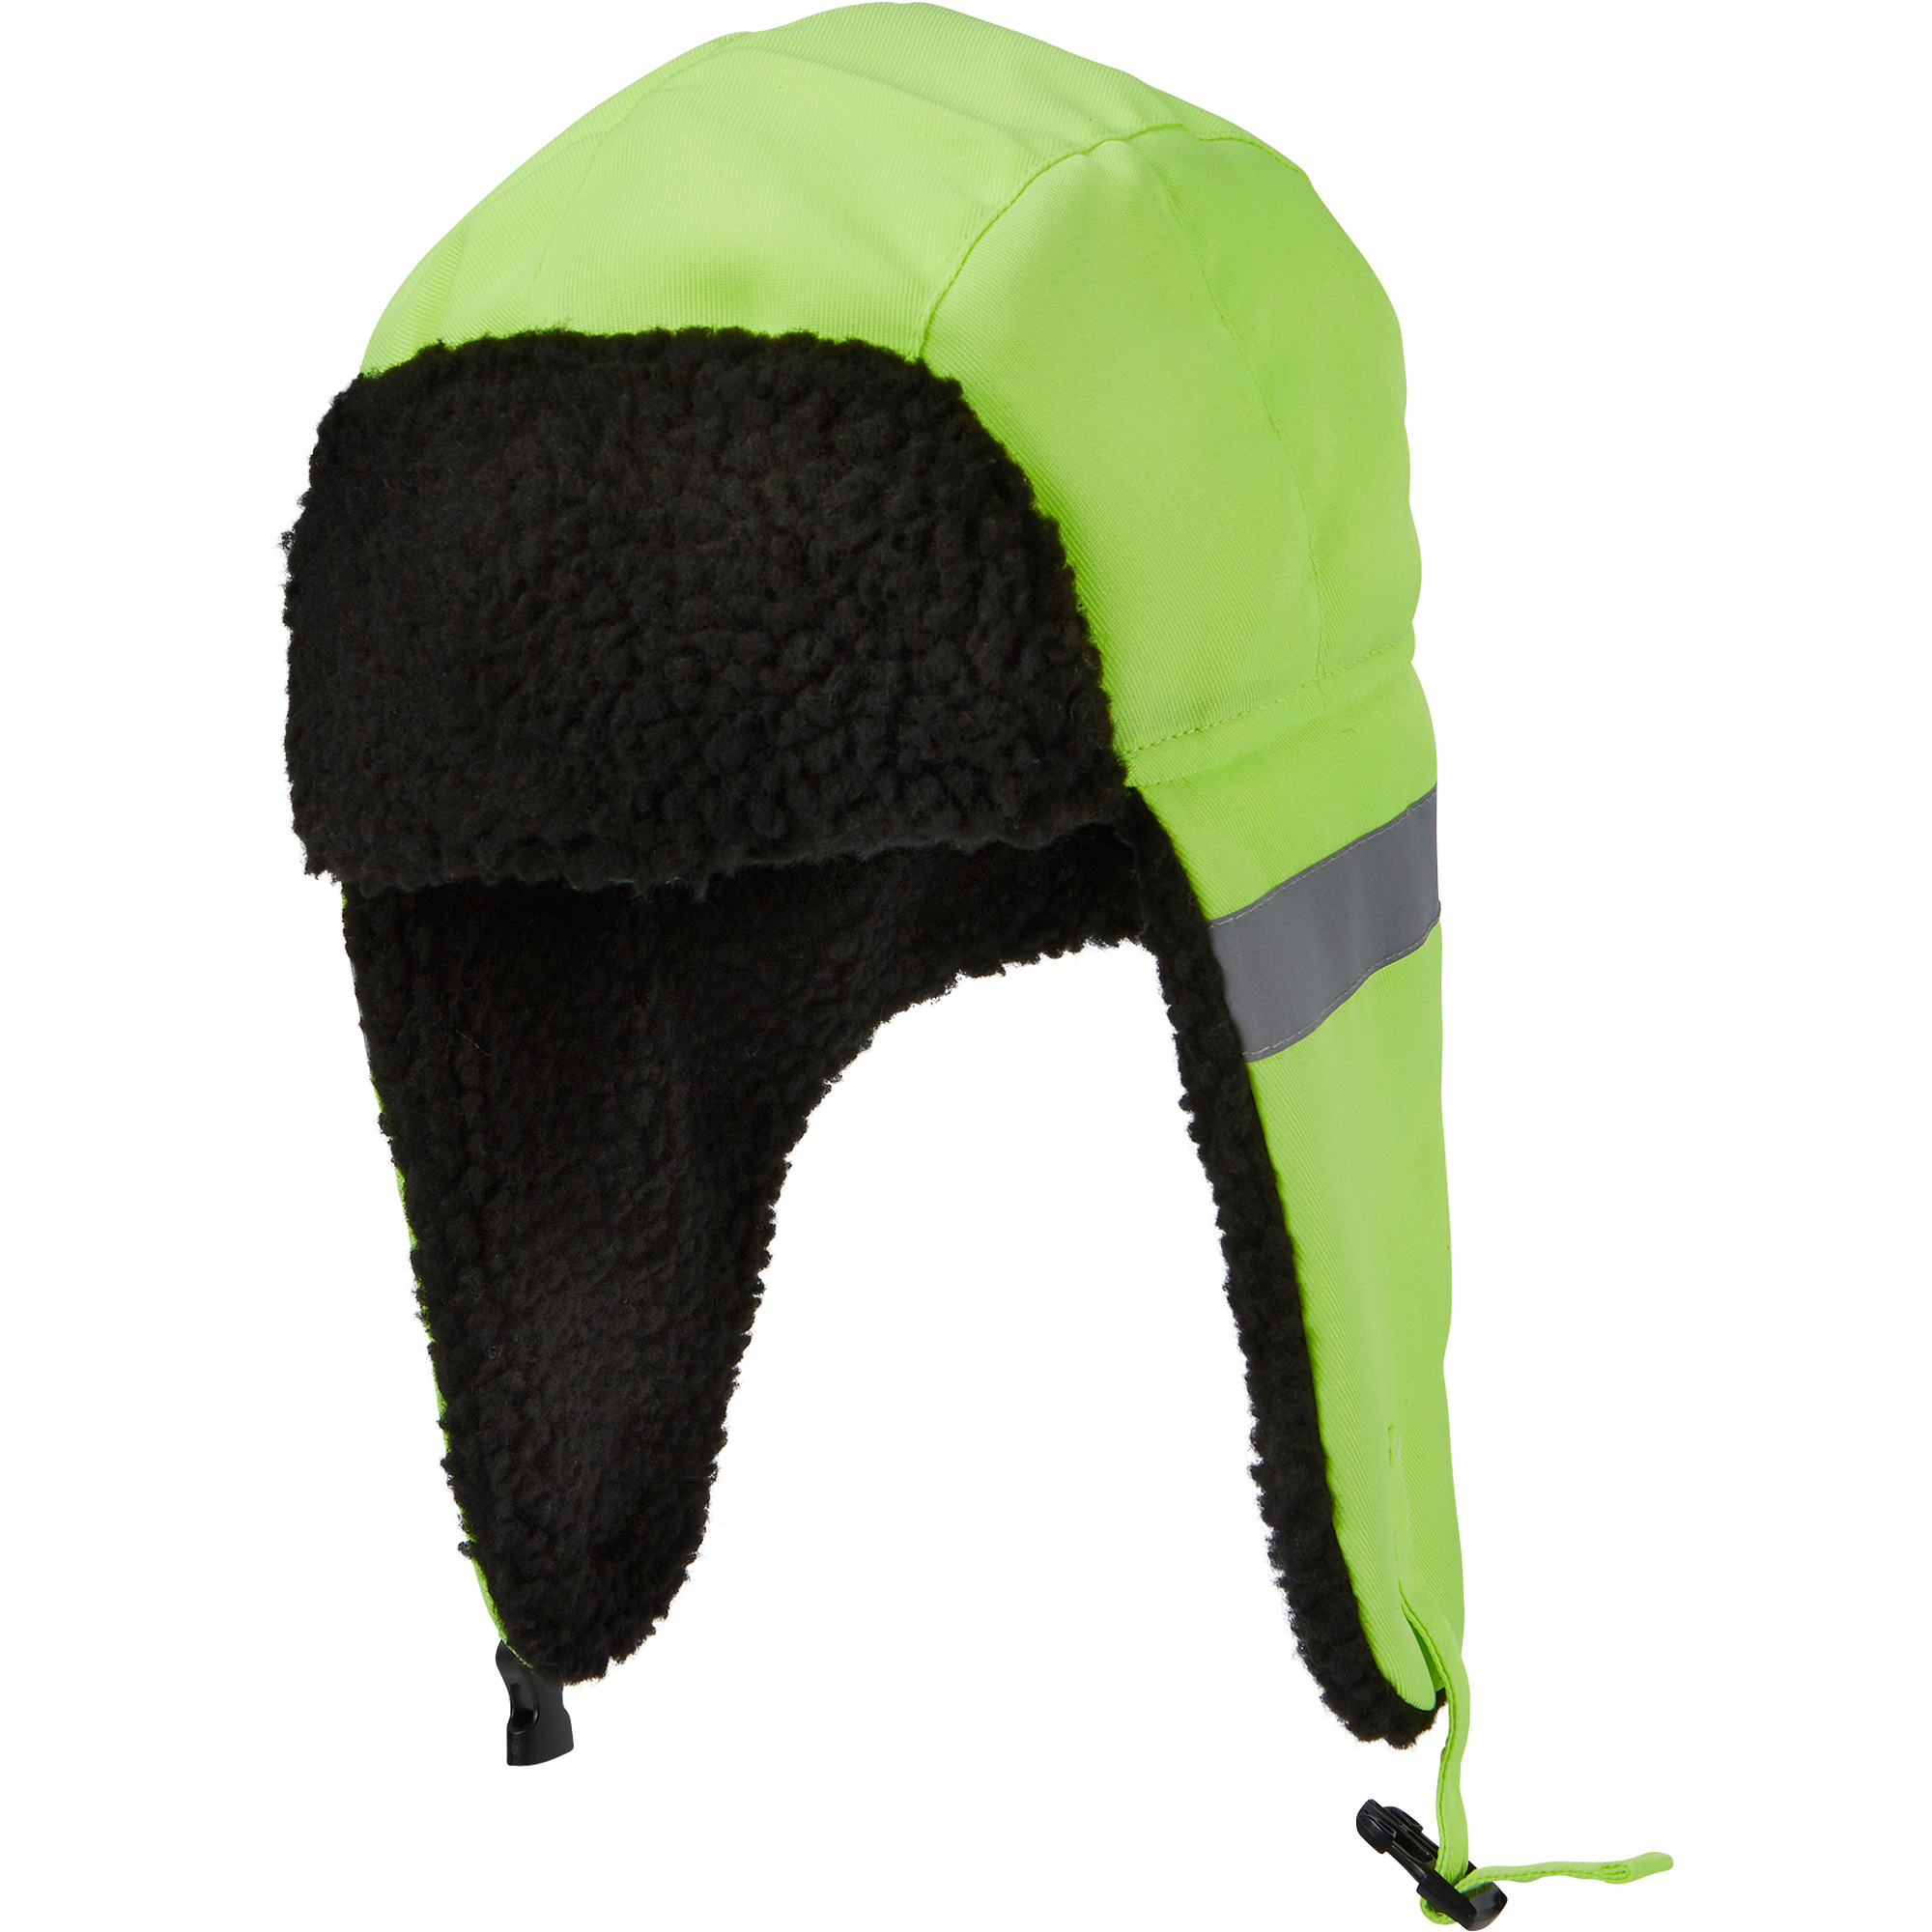 Gravel Gear Men's Aviator-Style Insulated Safety Hat â Lime